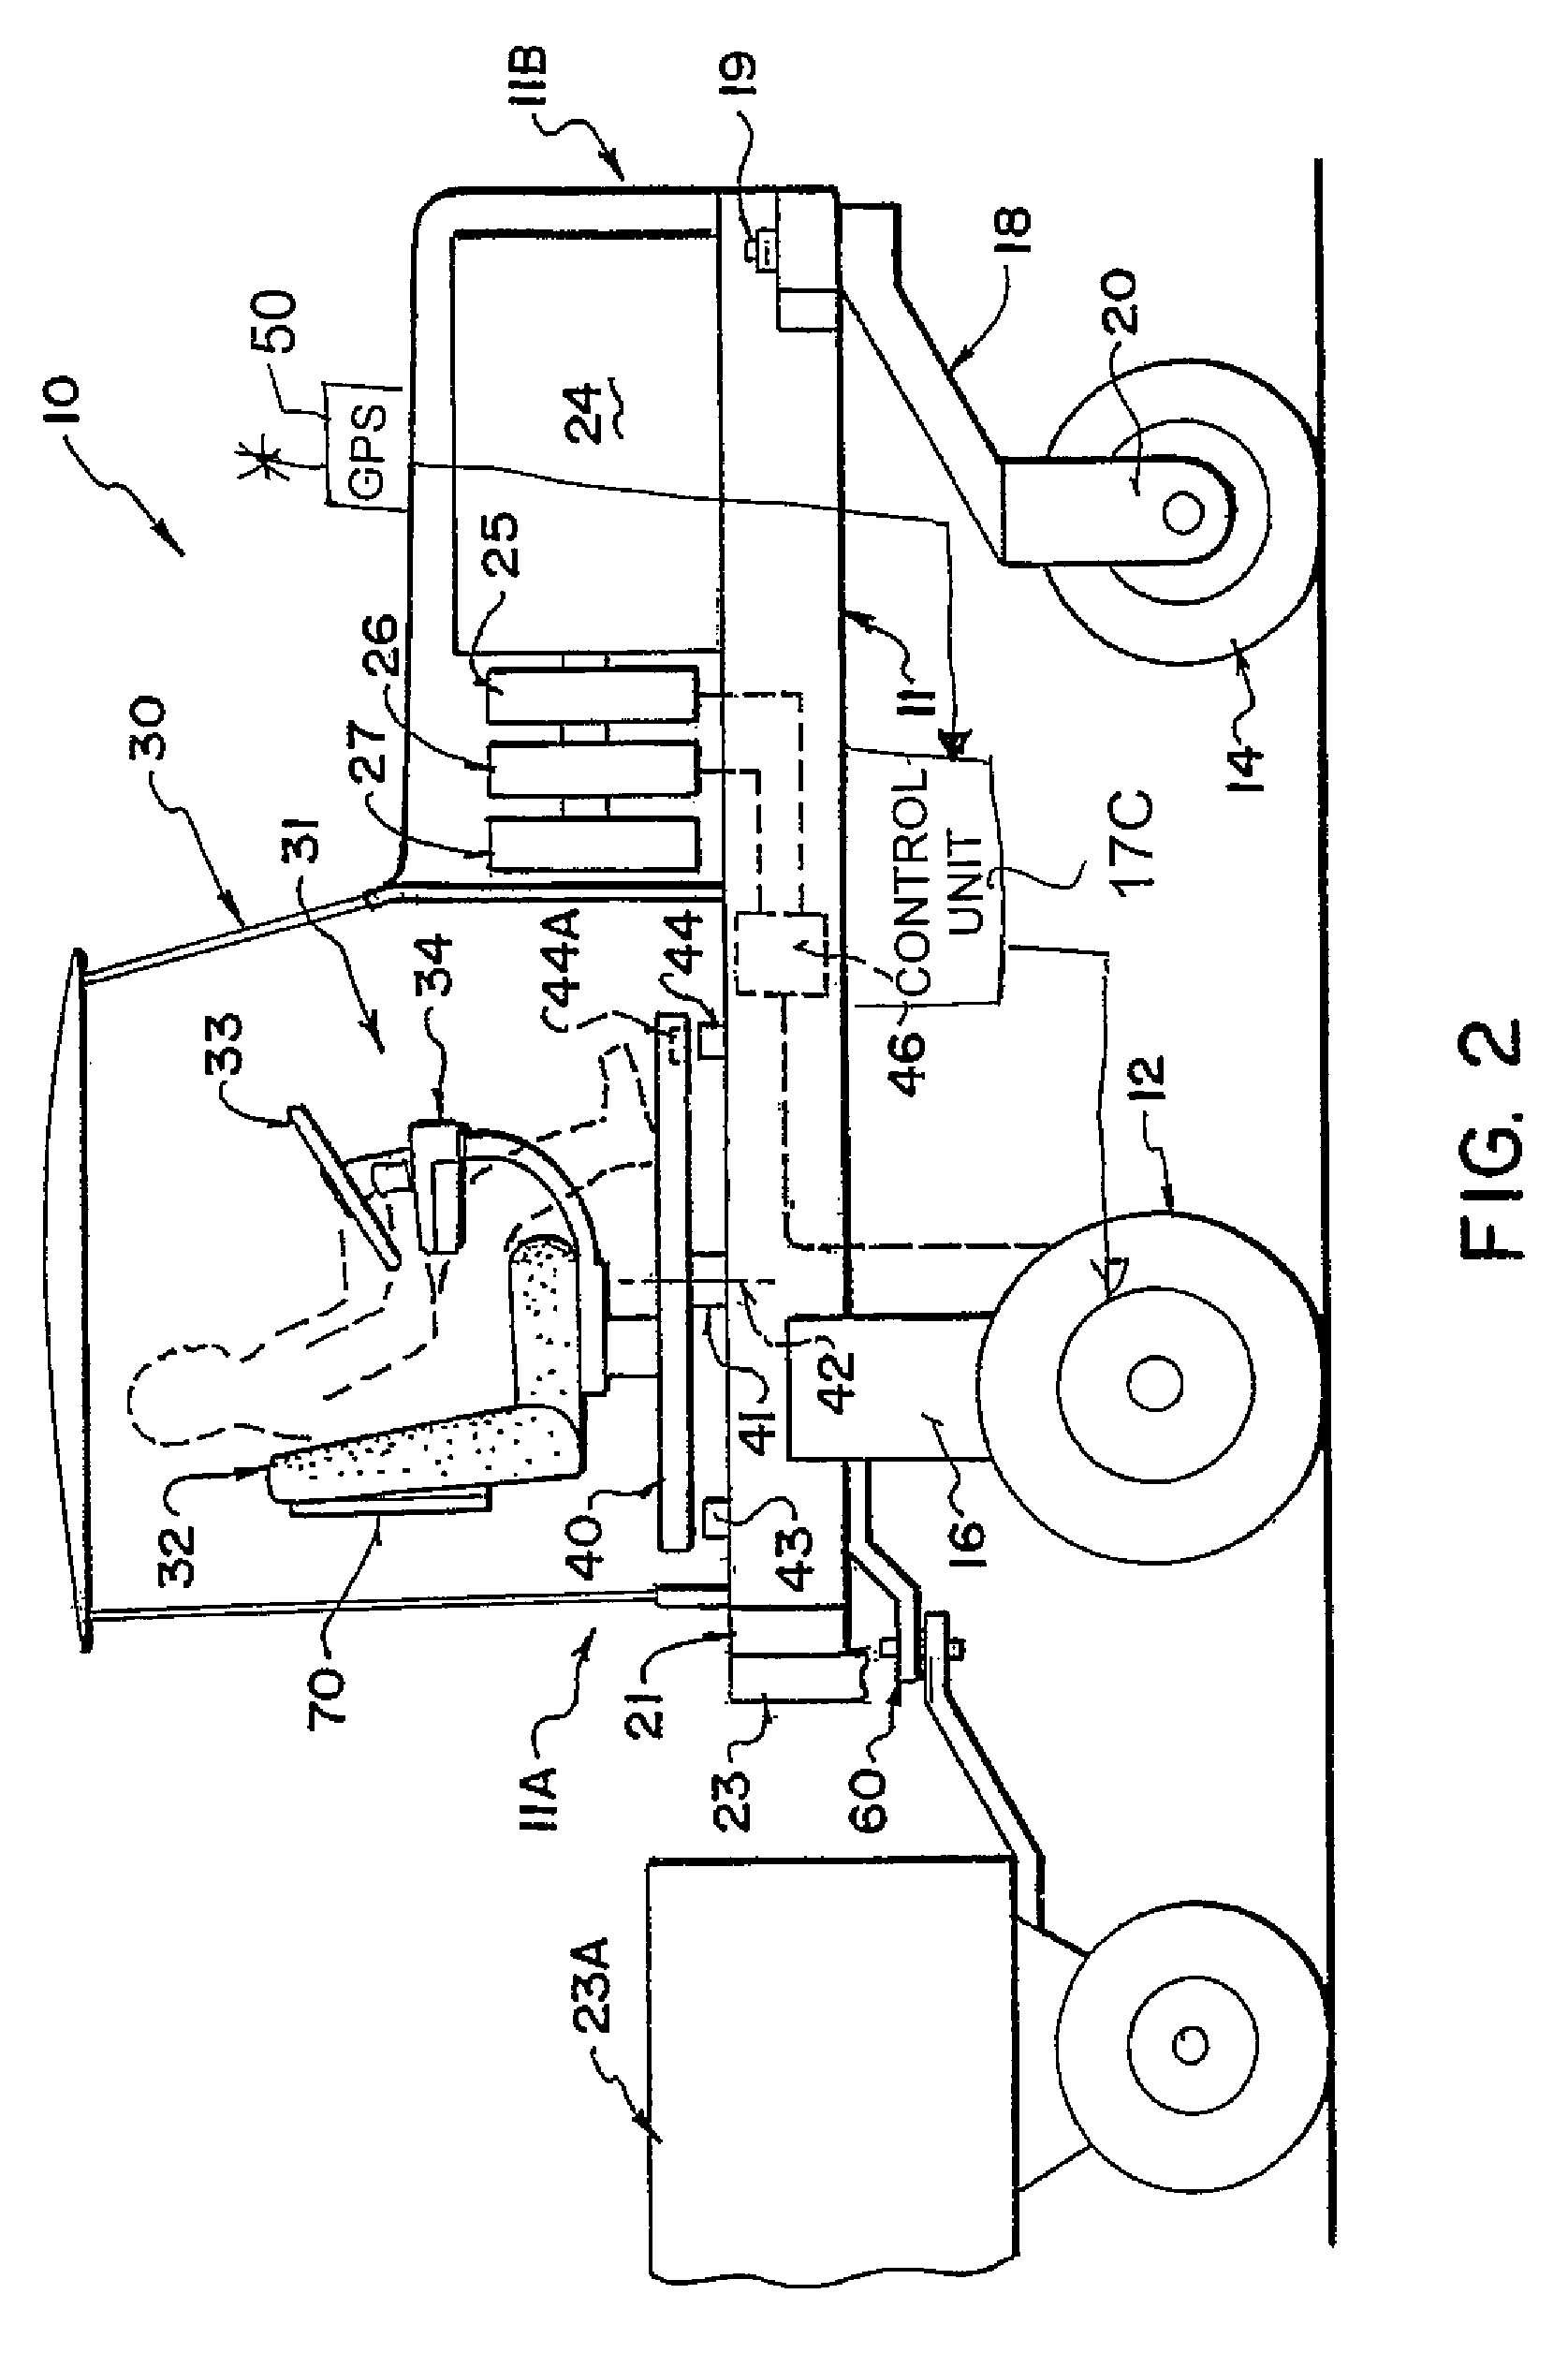 Speed and steering control of a hydraulically driven tractor